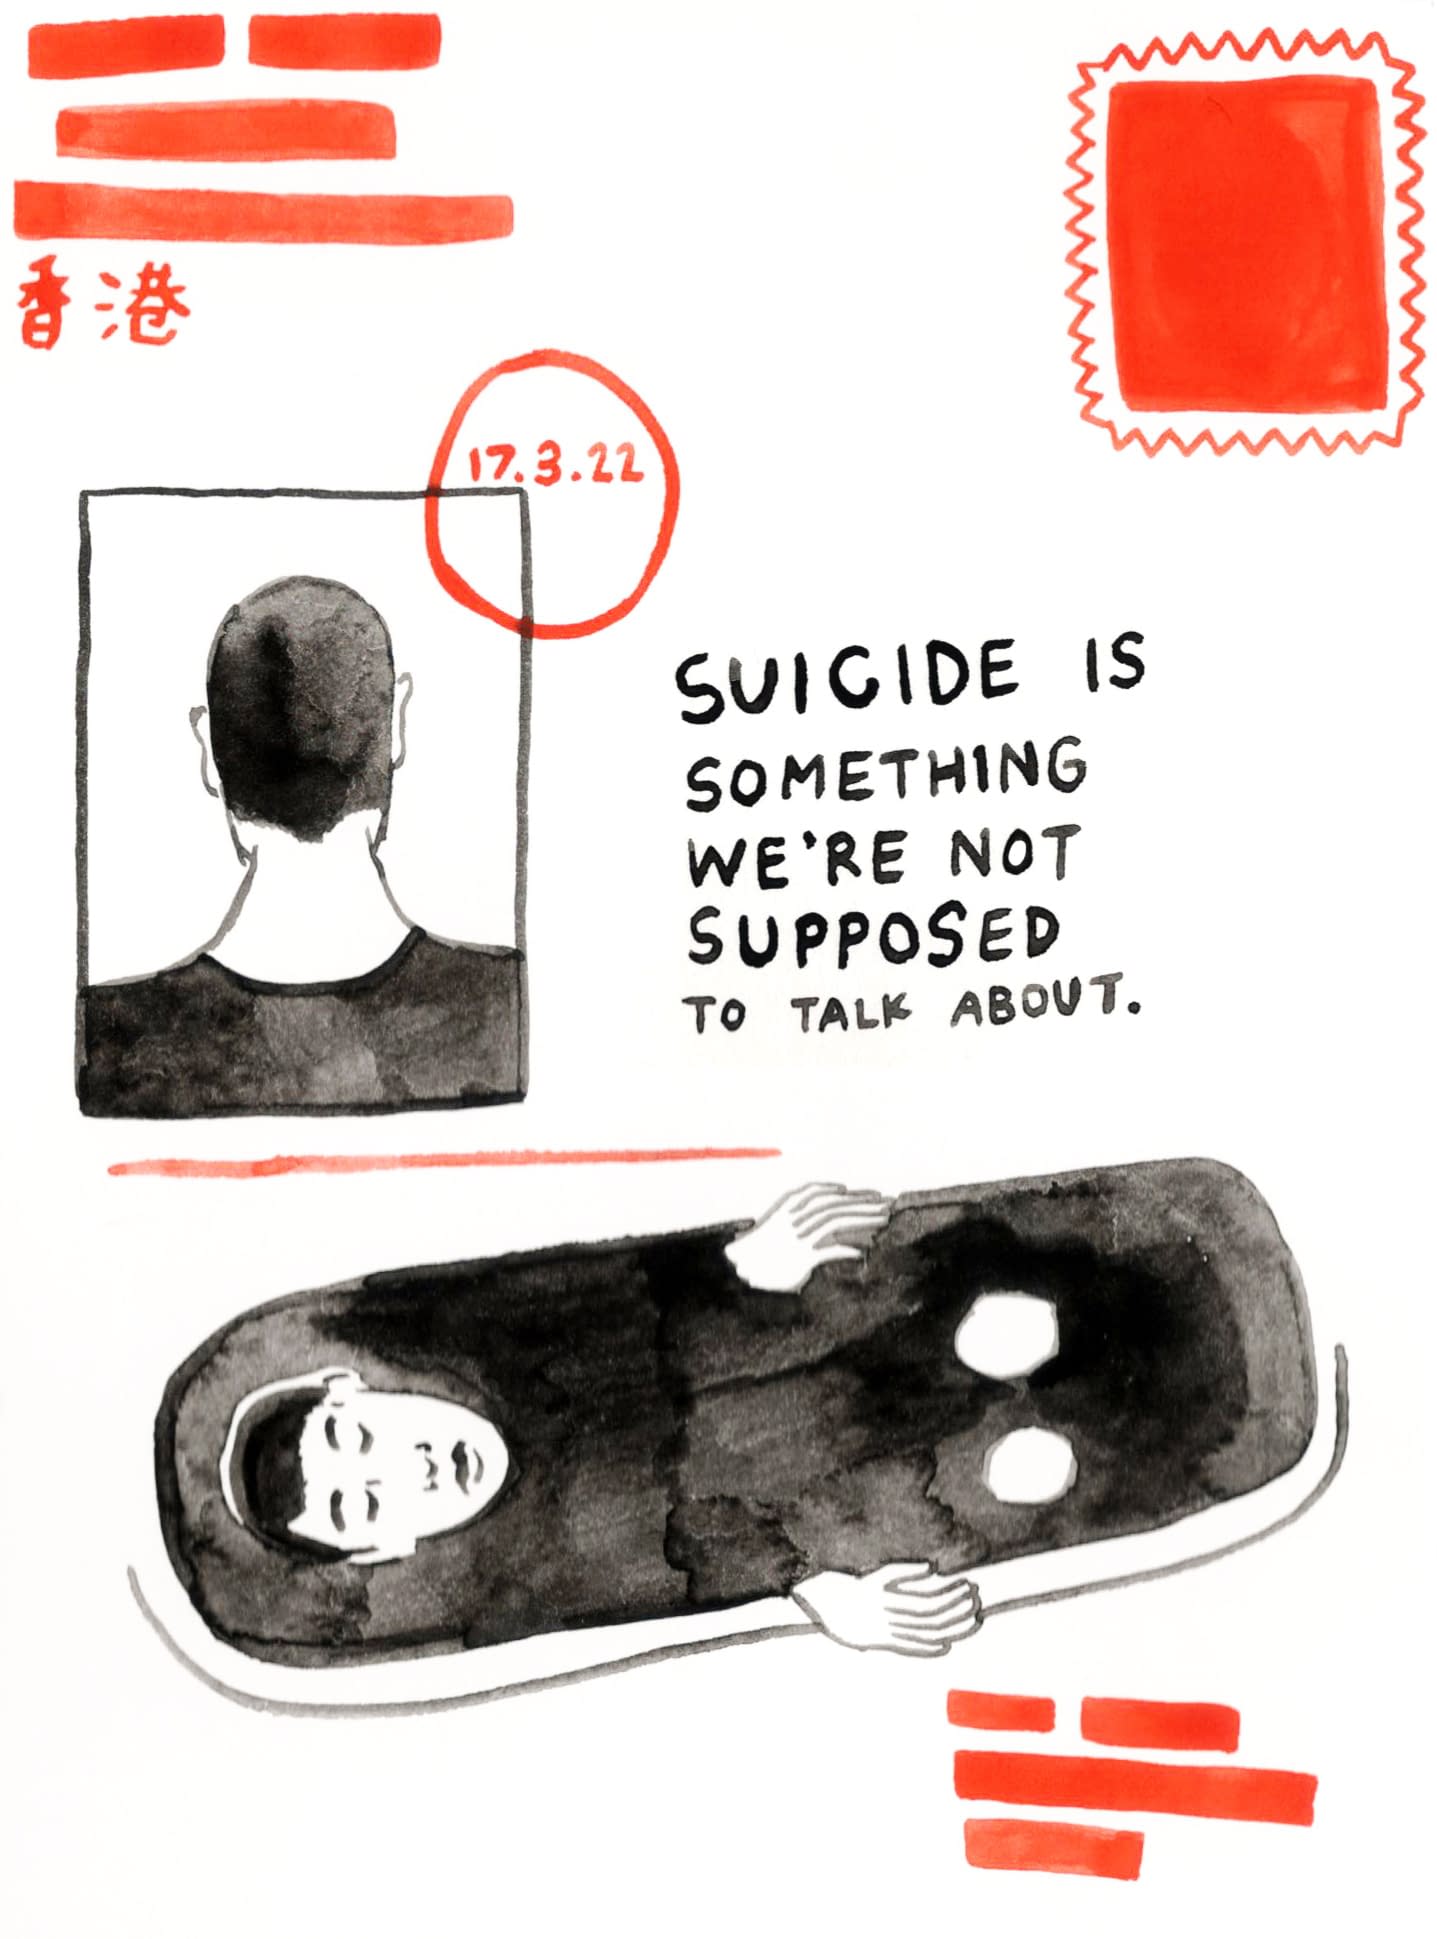 This comic was created with watercolor on paper. The first panel begins with the text “Suicide is something we’re not supposed to talk about.” This is accompanied by two self-portrait illustrations of the author. In one, we just see the back of her head; her black hair is cut short. In the other, she is submerged in a bathtub with just her face, hands, and kneecaps emerging out of the water. The Chinese characters 香港 indicate she is writing from Hong Kong.